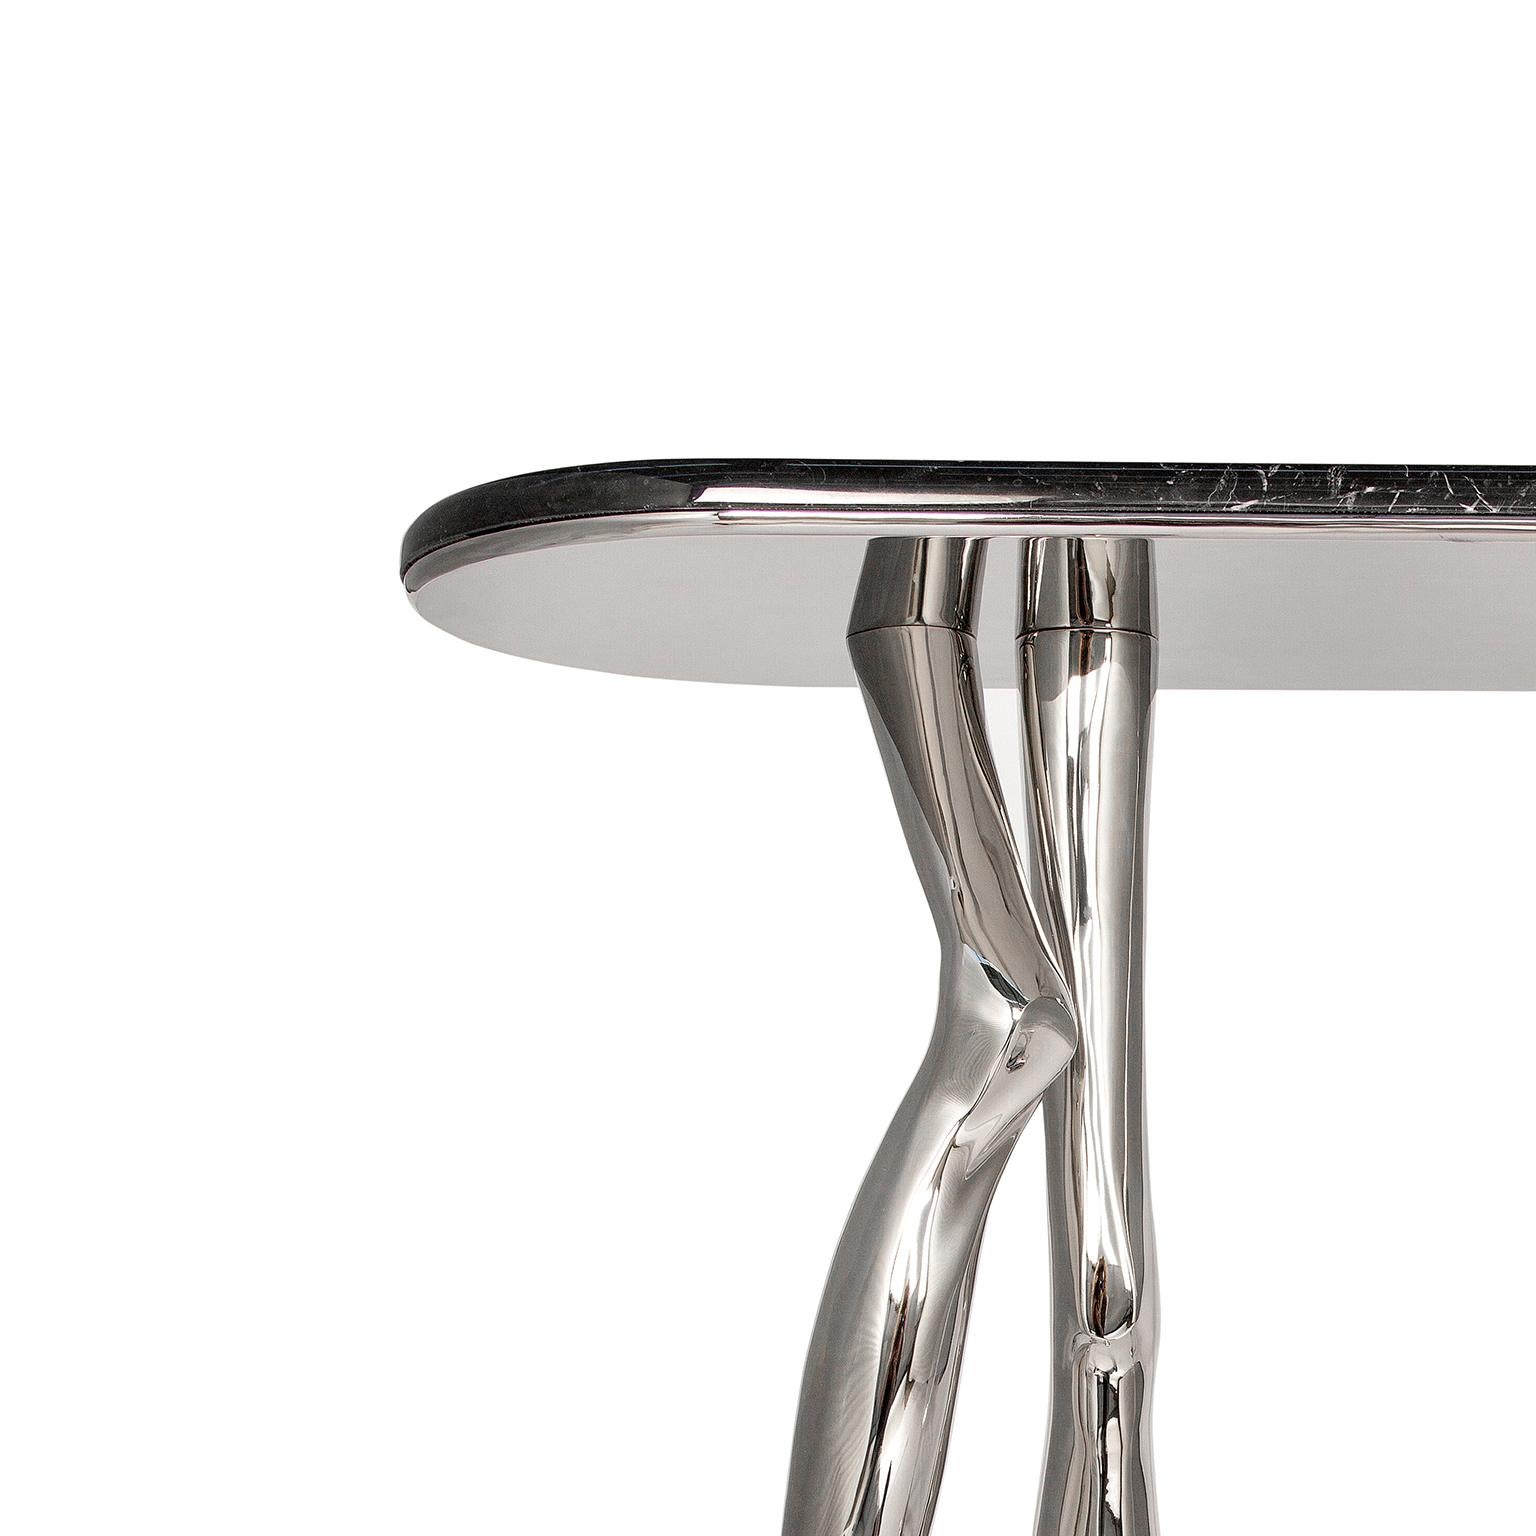 Cast Contemporary Monroe Silver Art Console Table, Nickel Brass and Black Marble Top For Sale